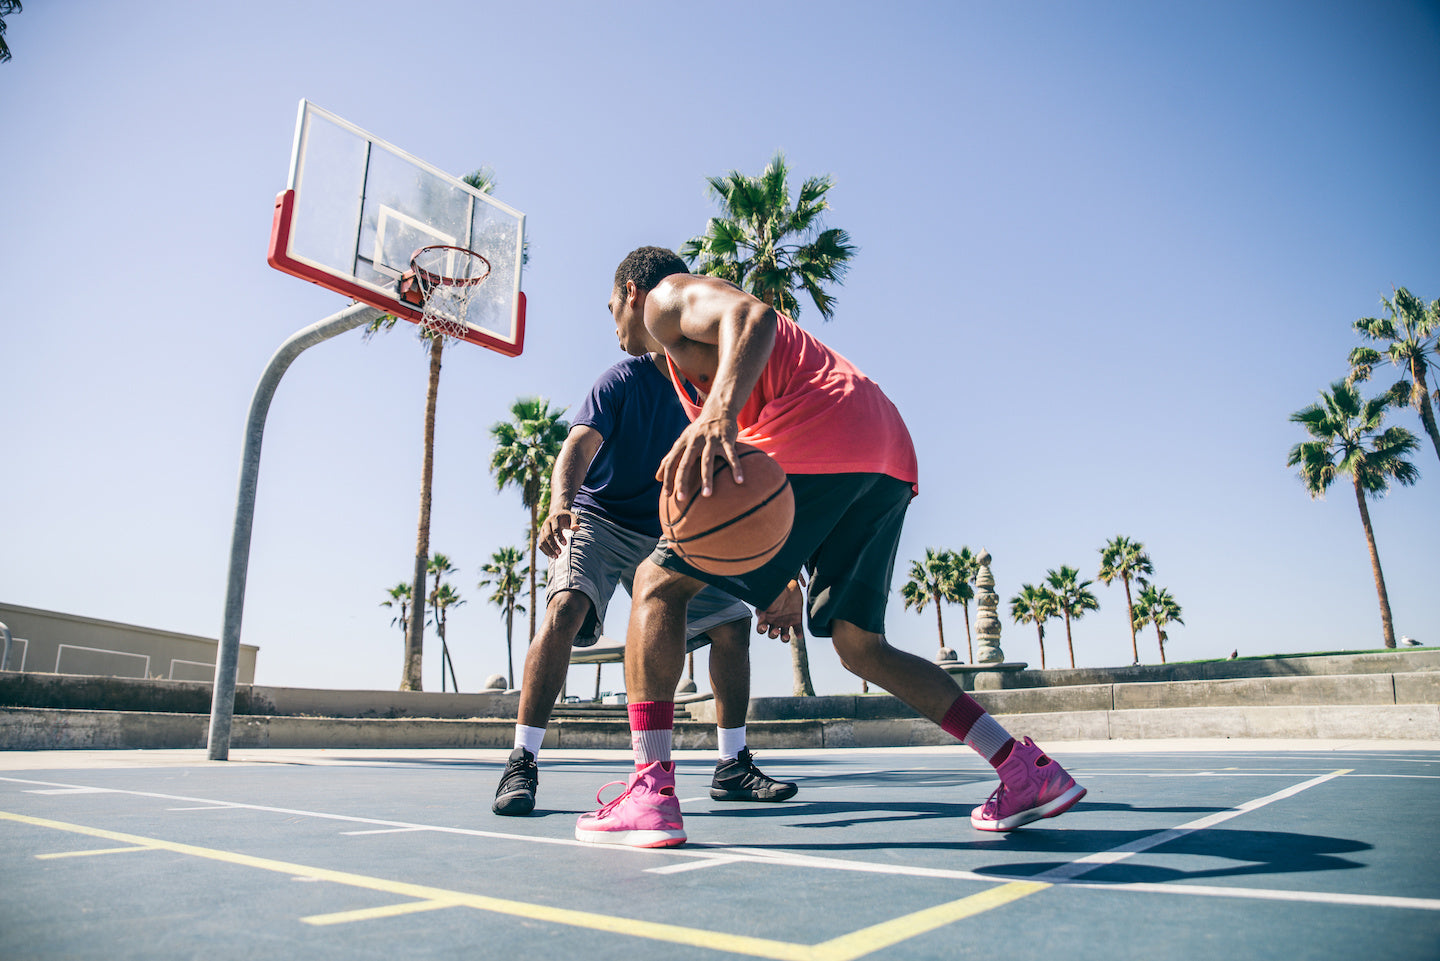 Two men playing basketball on an outdoor court